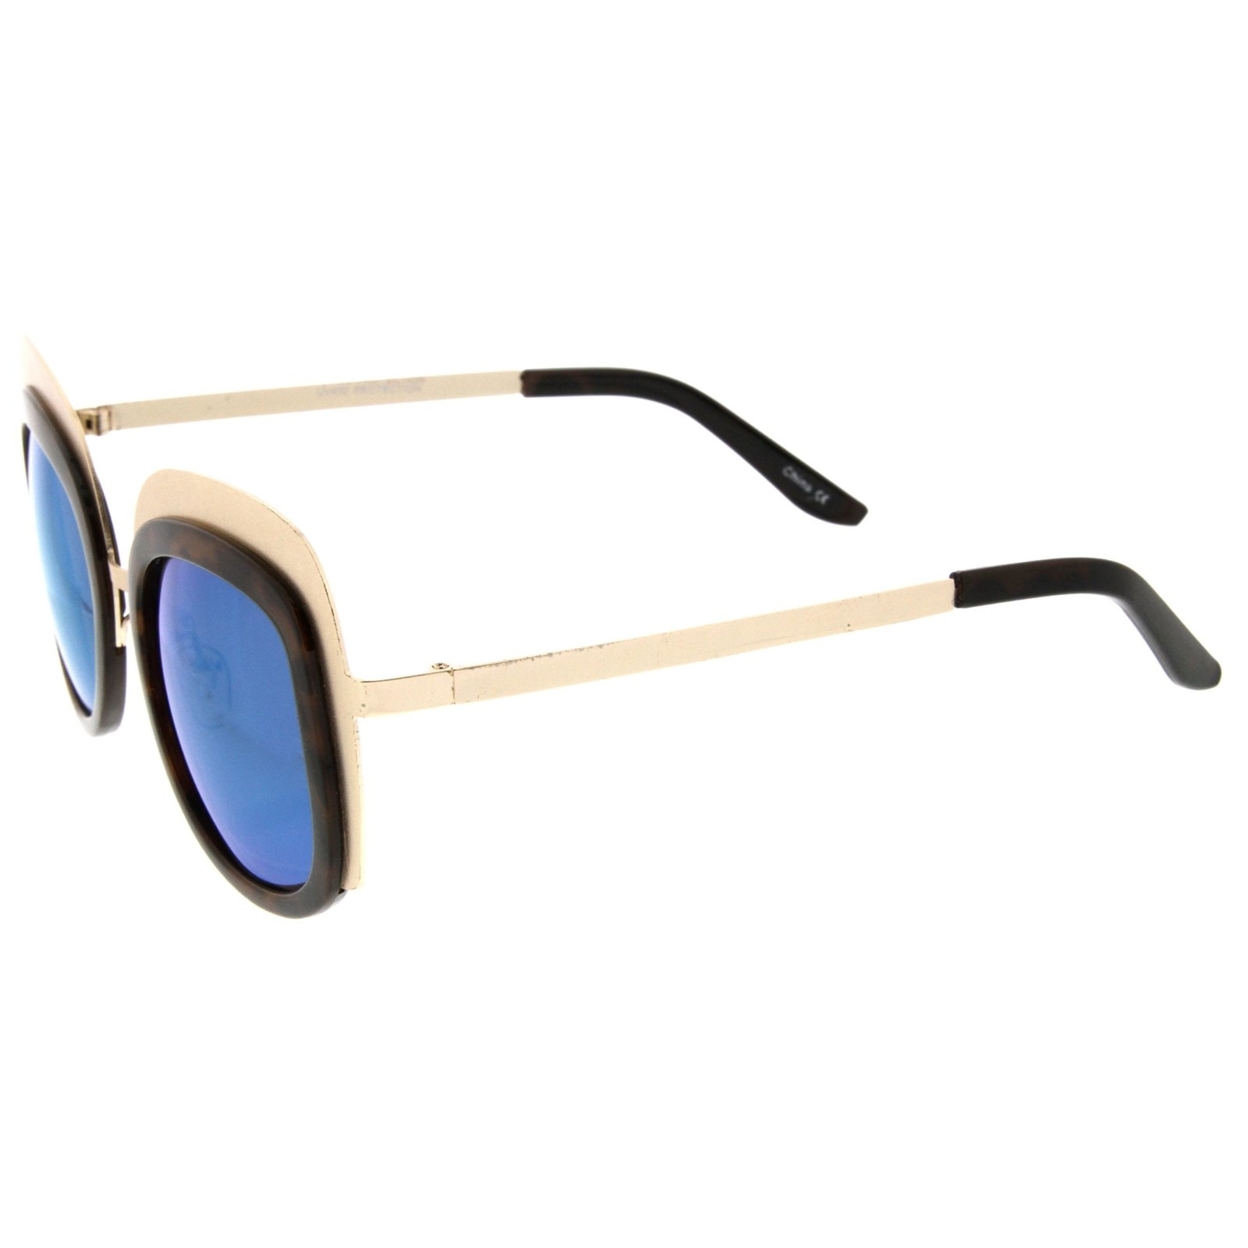 Oversize Metal Frame Border Colored Mirror Lens Square Sunglasses 43mm - Gold-Creme / Pink Mirror